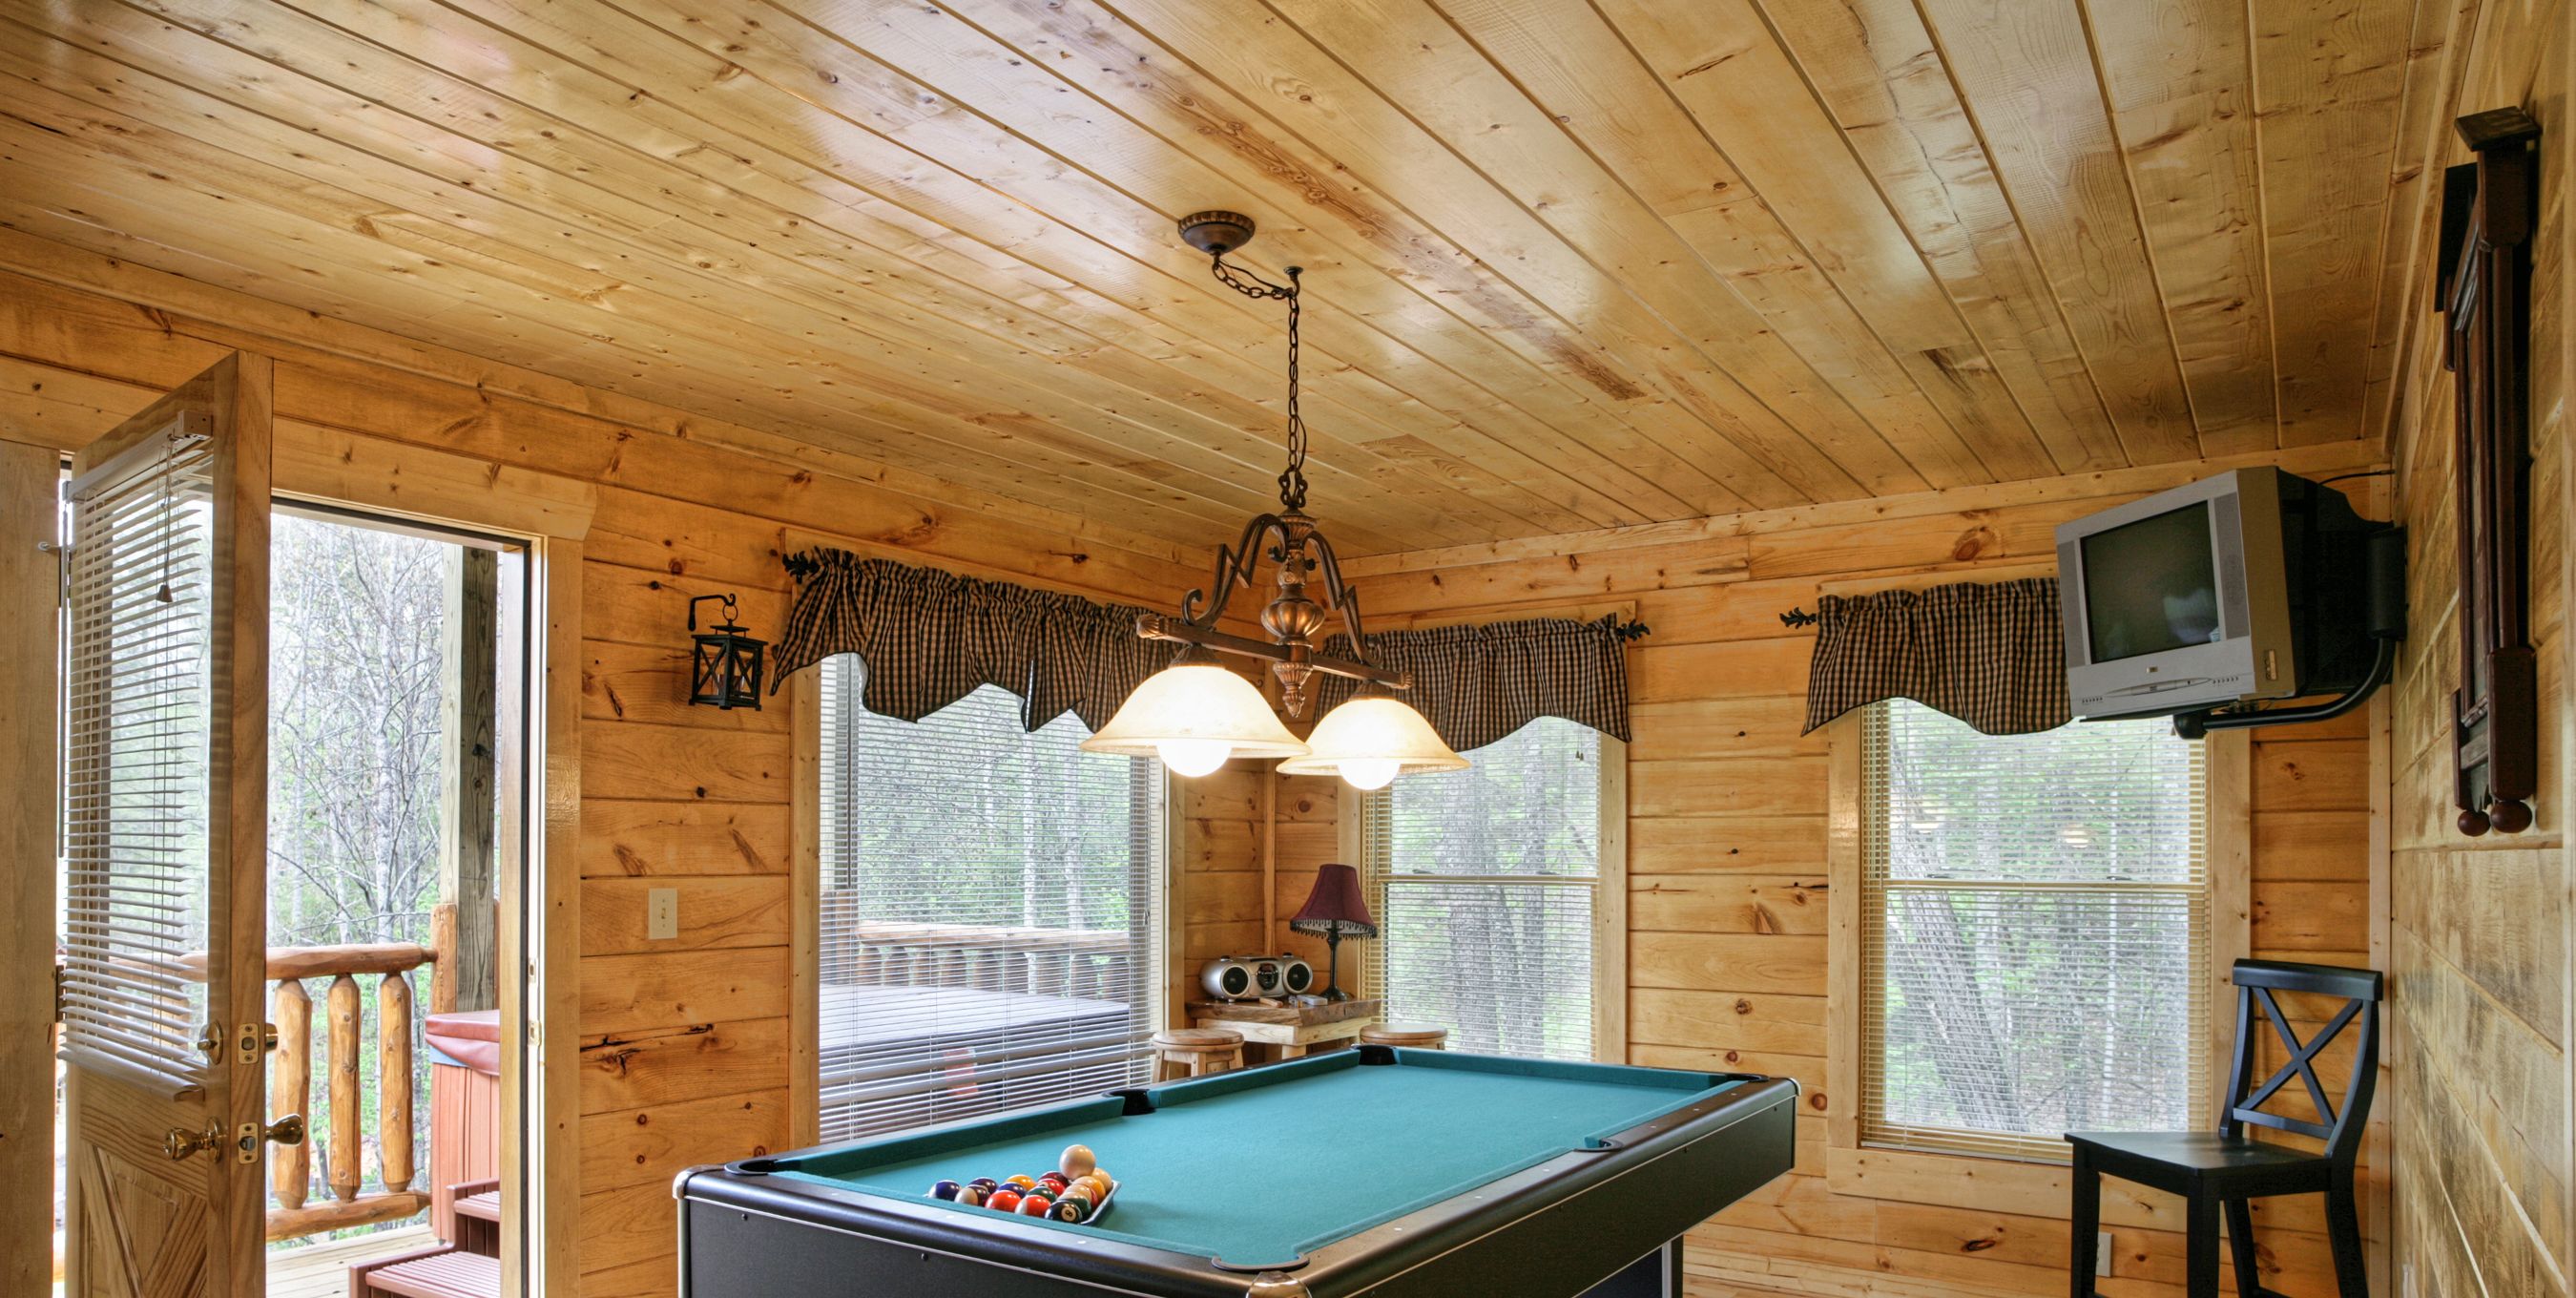 19 Game Room Ideas That’ll Happily Make You a Homebody